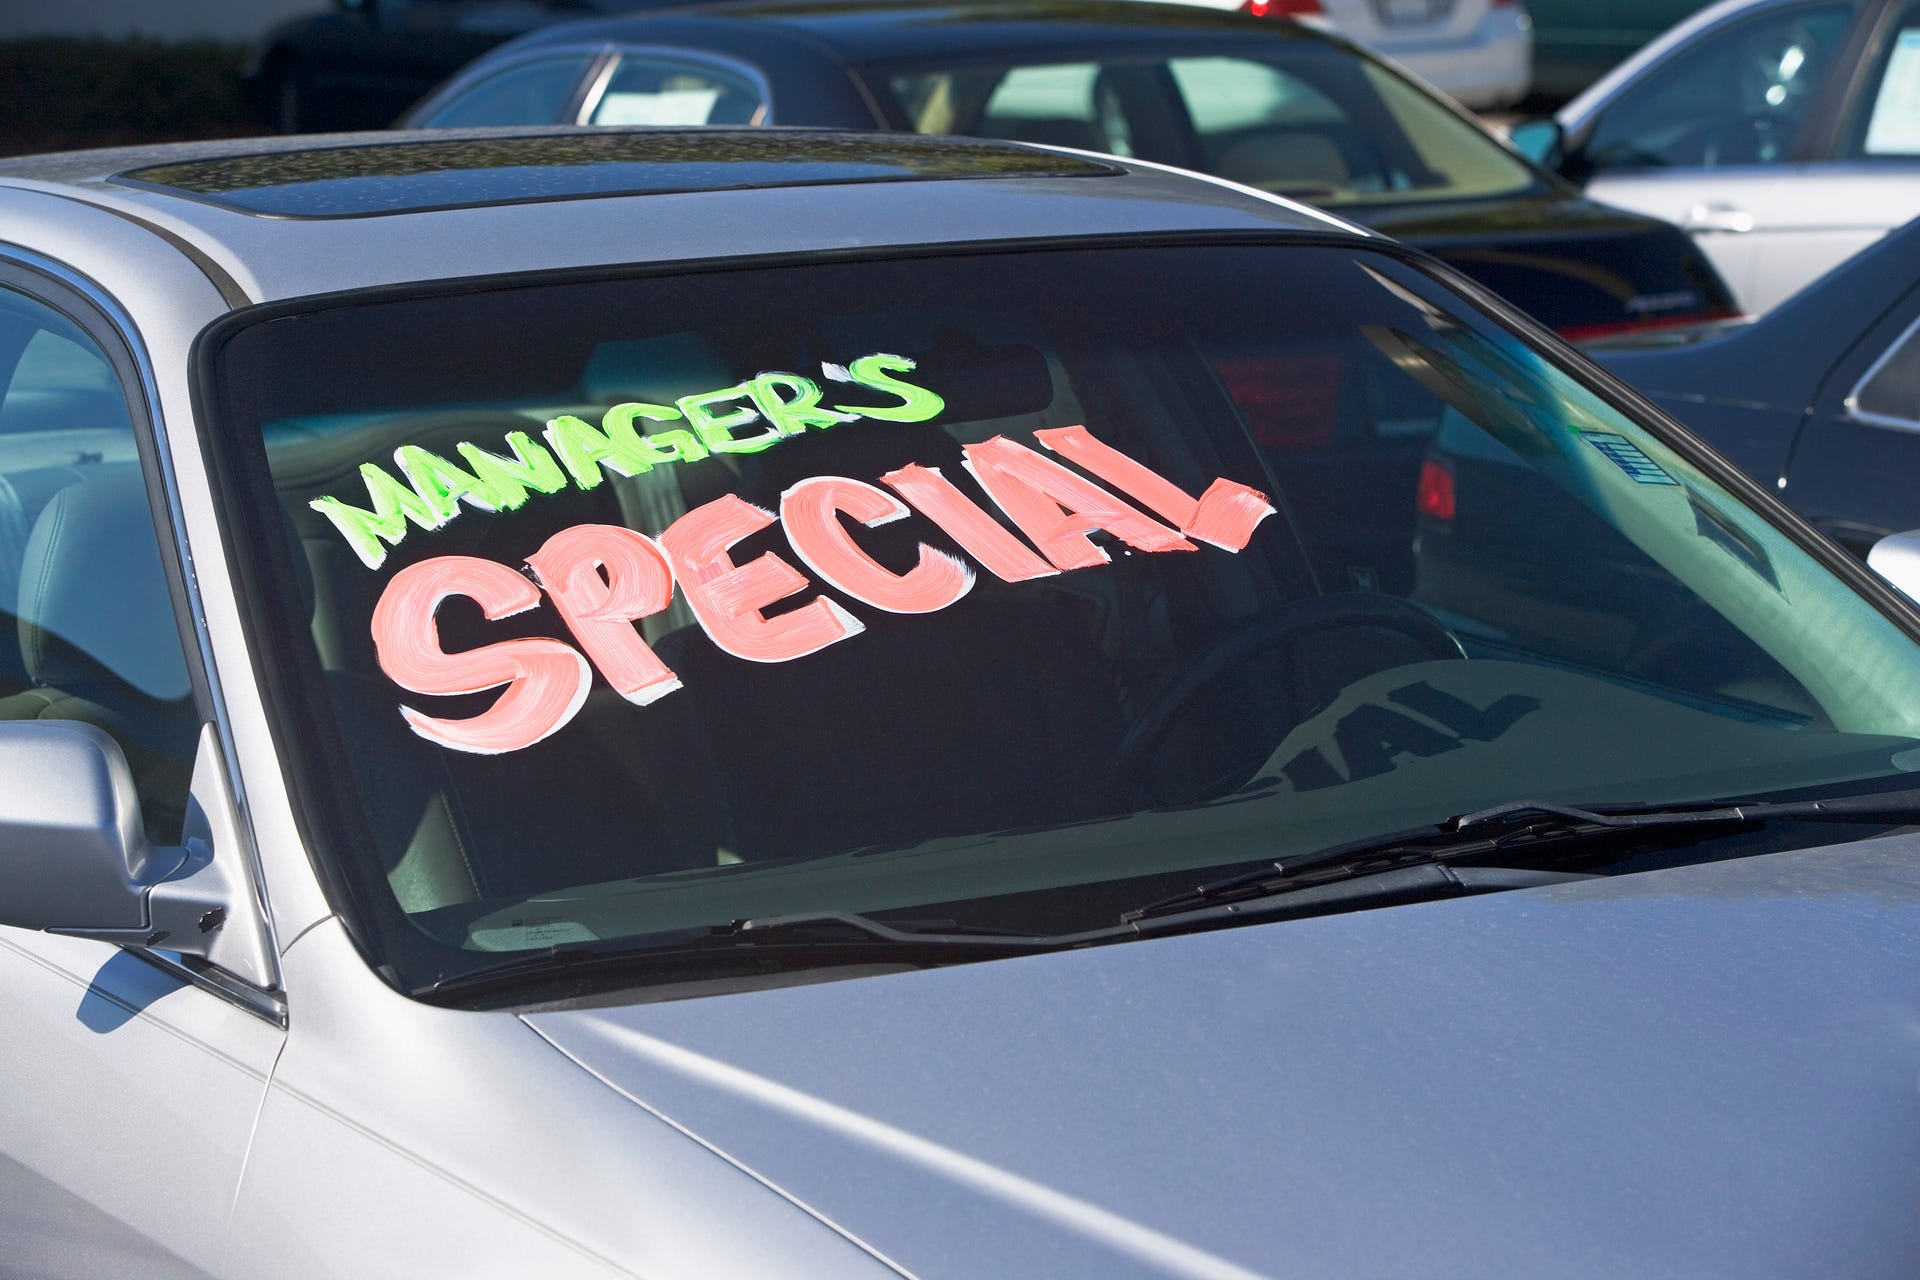 Used car with Manager's Special written on the windshield